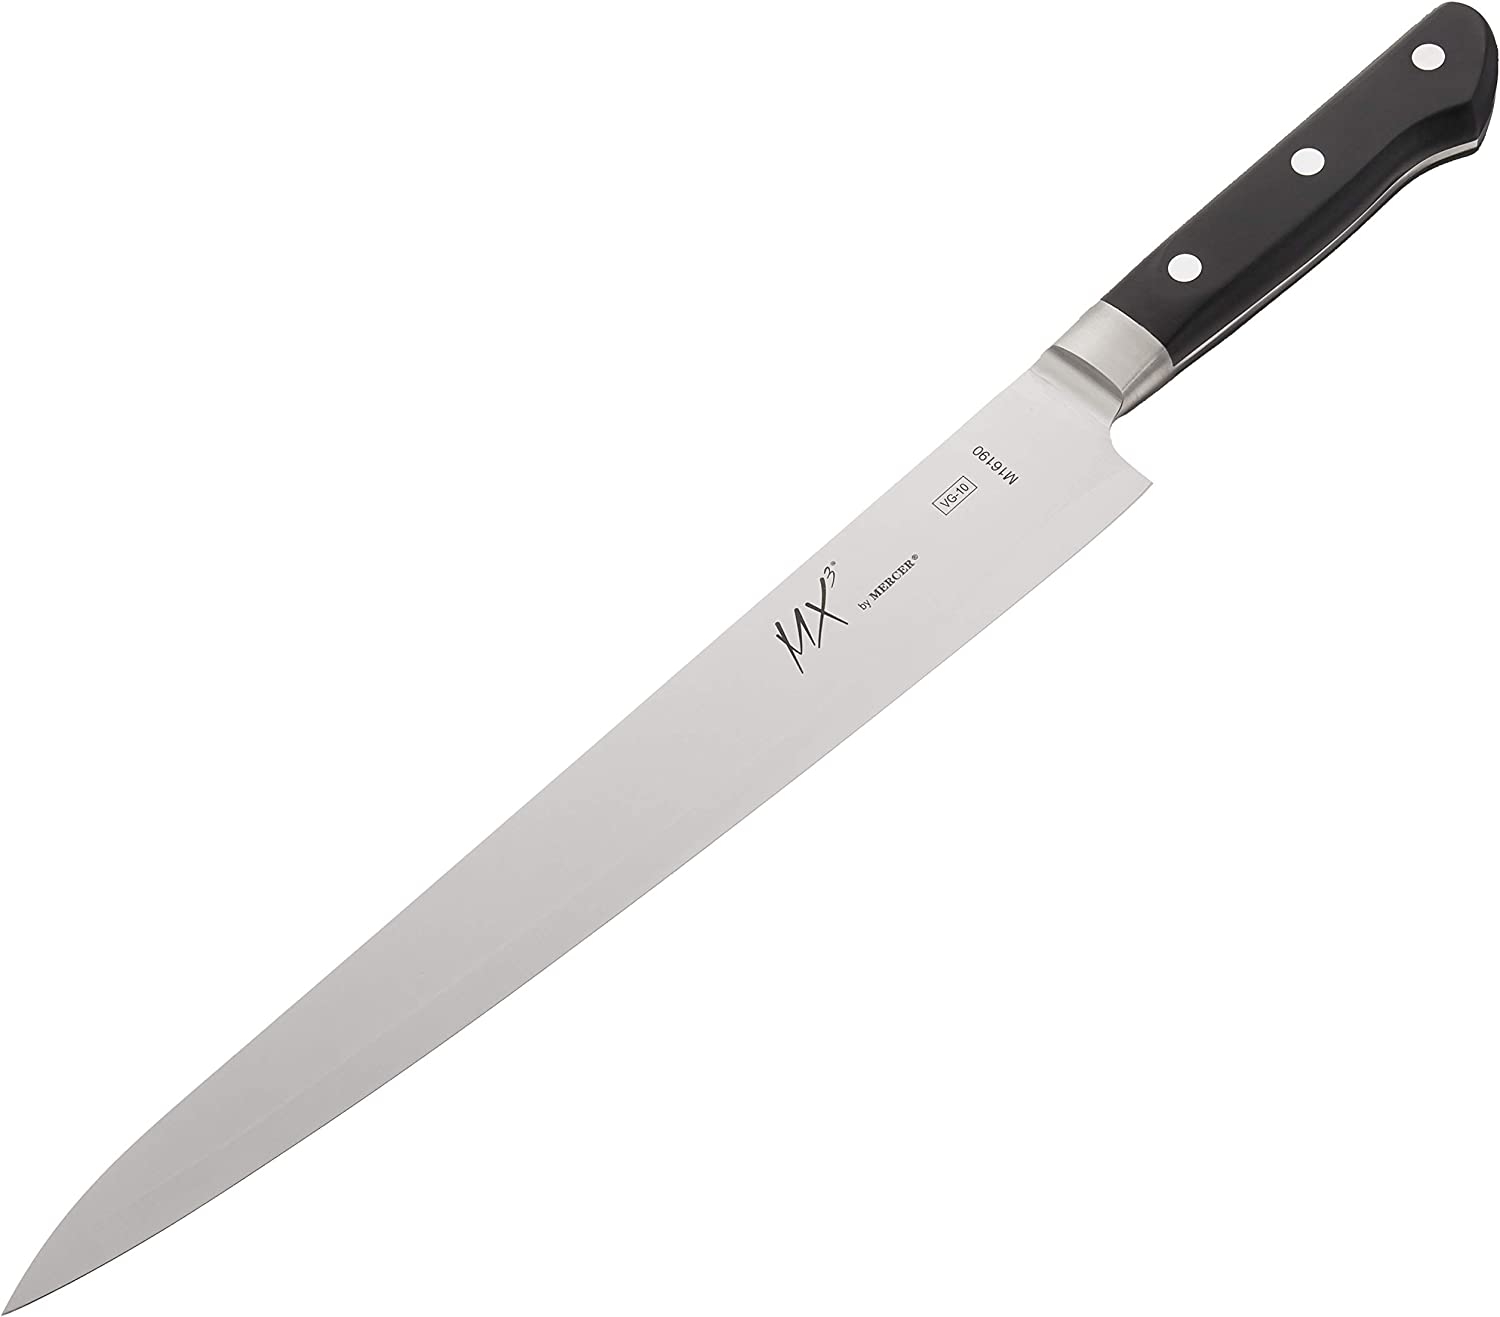 Mercer Culinary MX3 Premium San Mai VG-10 Steel Core Blade Gyuto Chef Knife, 270mm 10 3/5 Inch Import To Shop ×Product